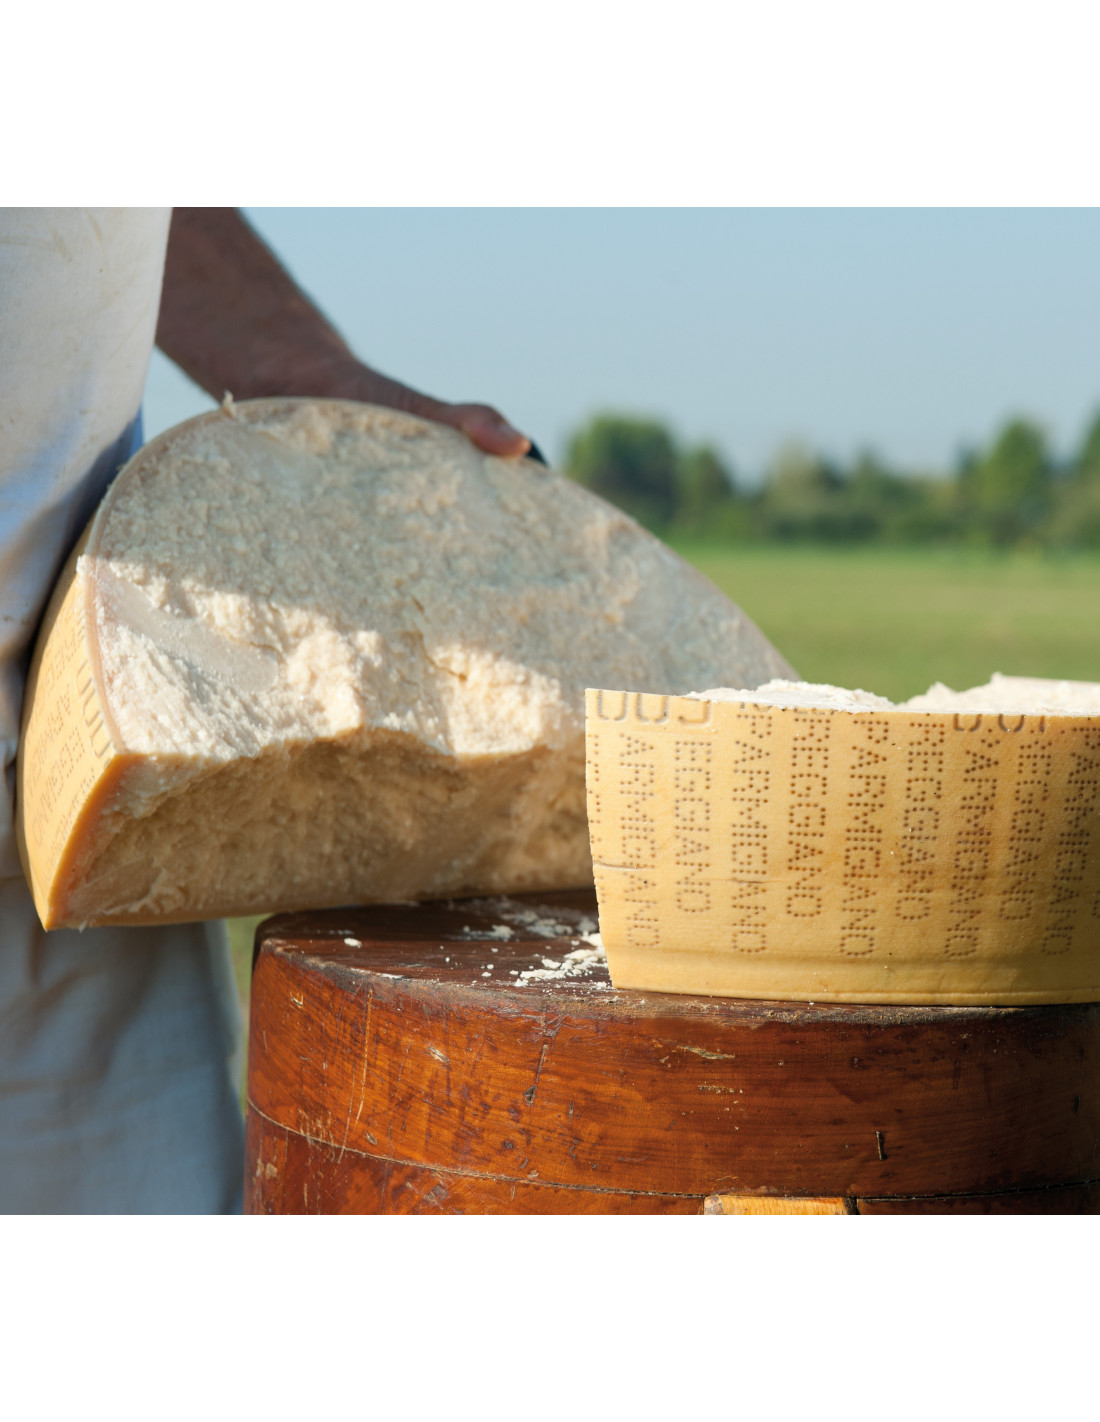 Parmigiano Reggiano PDO - From Hill - 36 Months (1.0 Kg. / 2.20 Lbs.)